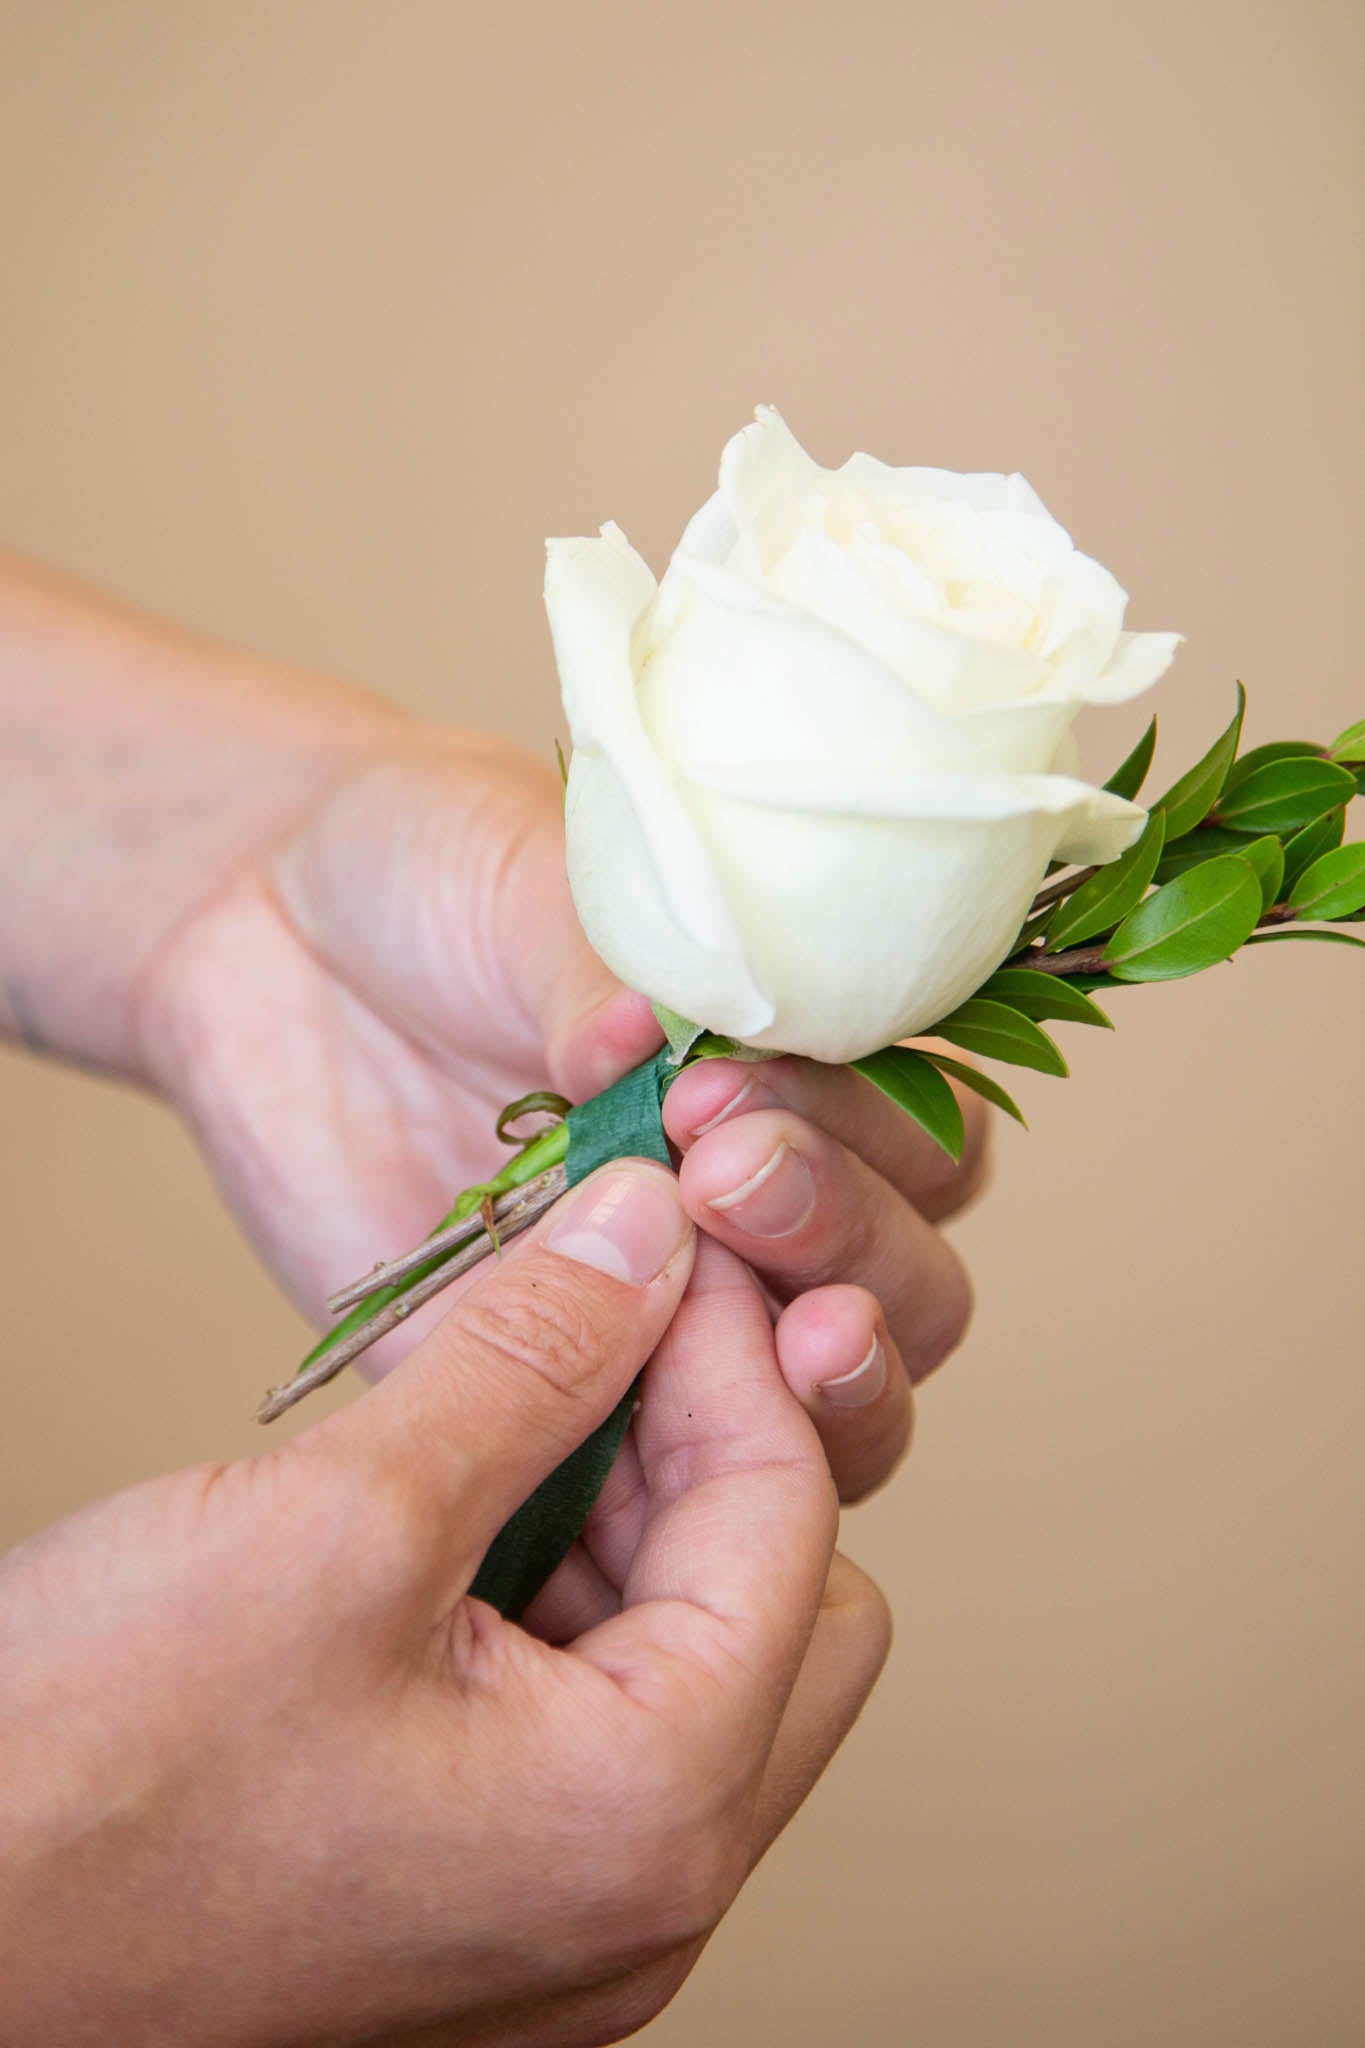 How to Make a Corsage, Step 5: Start with Focal Flower and Greenery